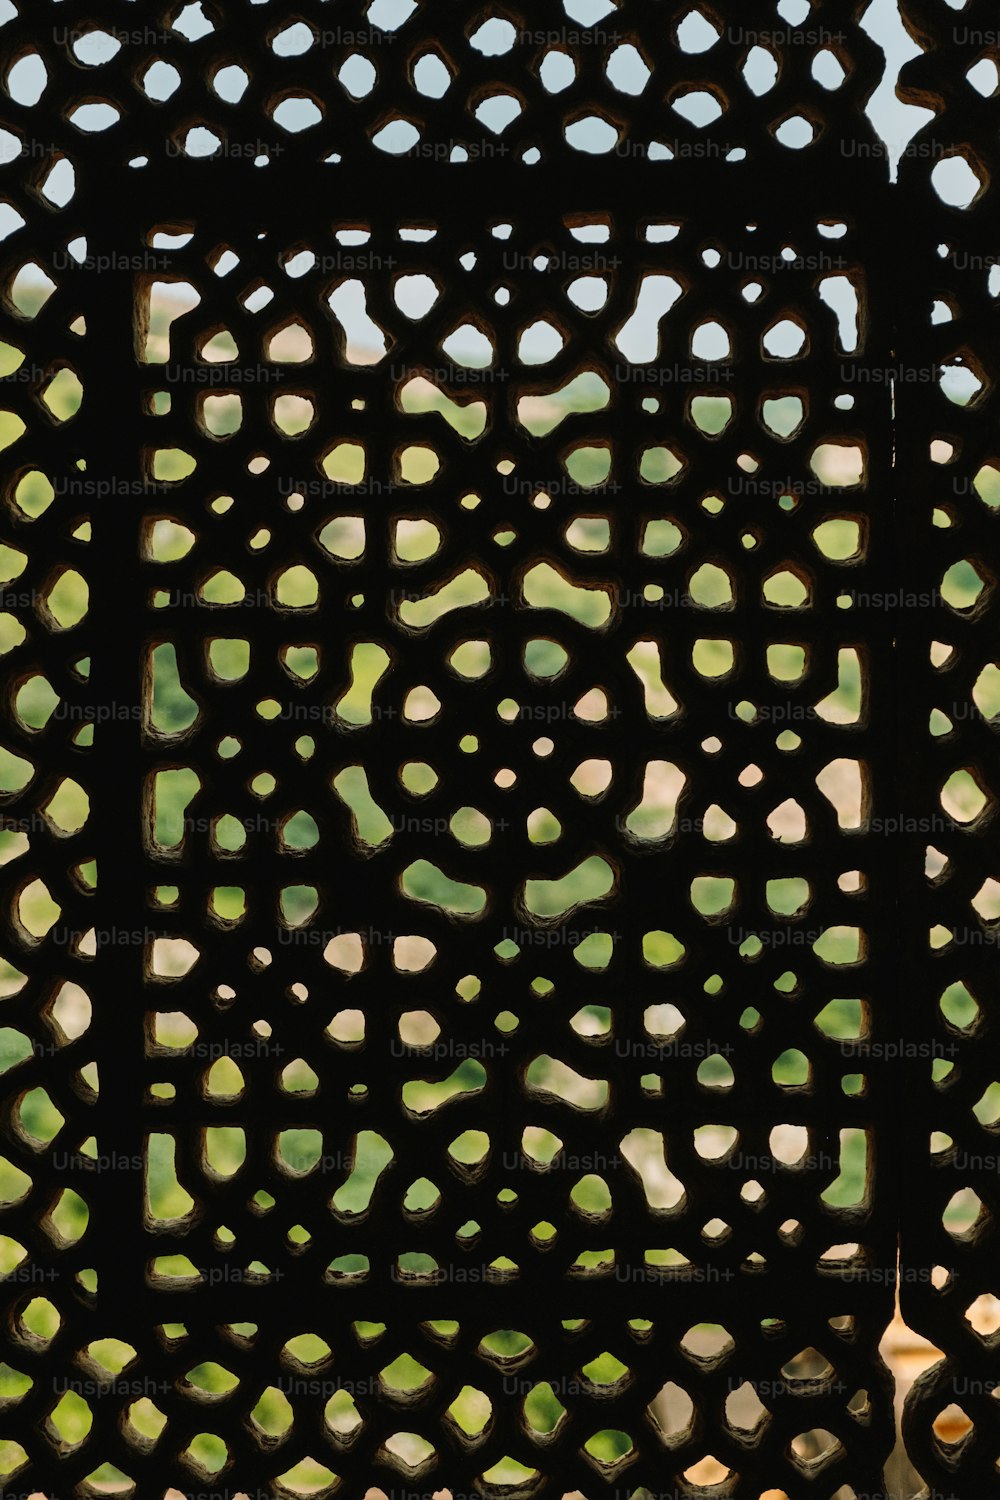 a close up of a metal grate with holes in it